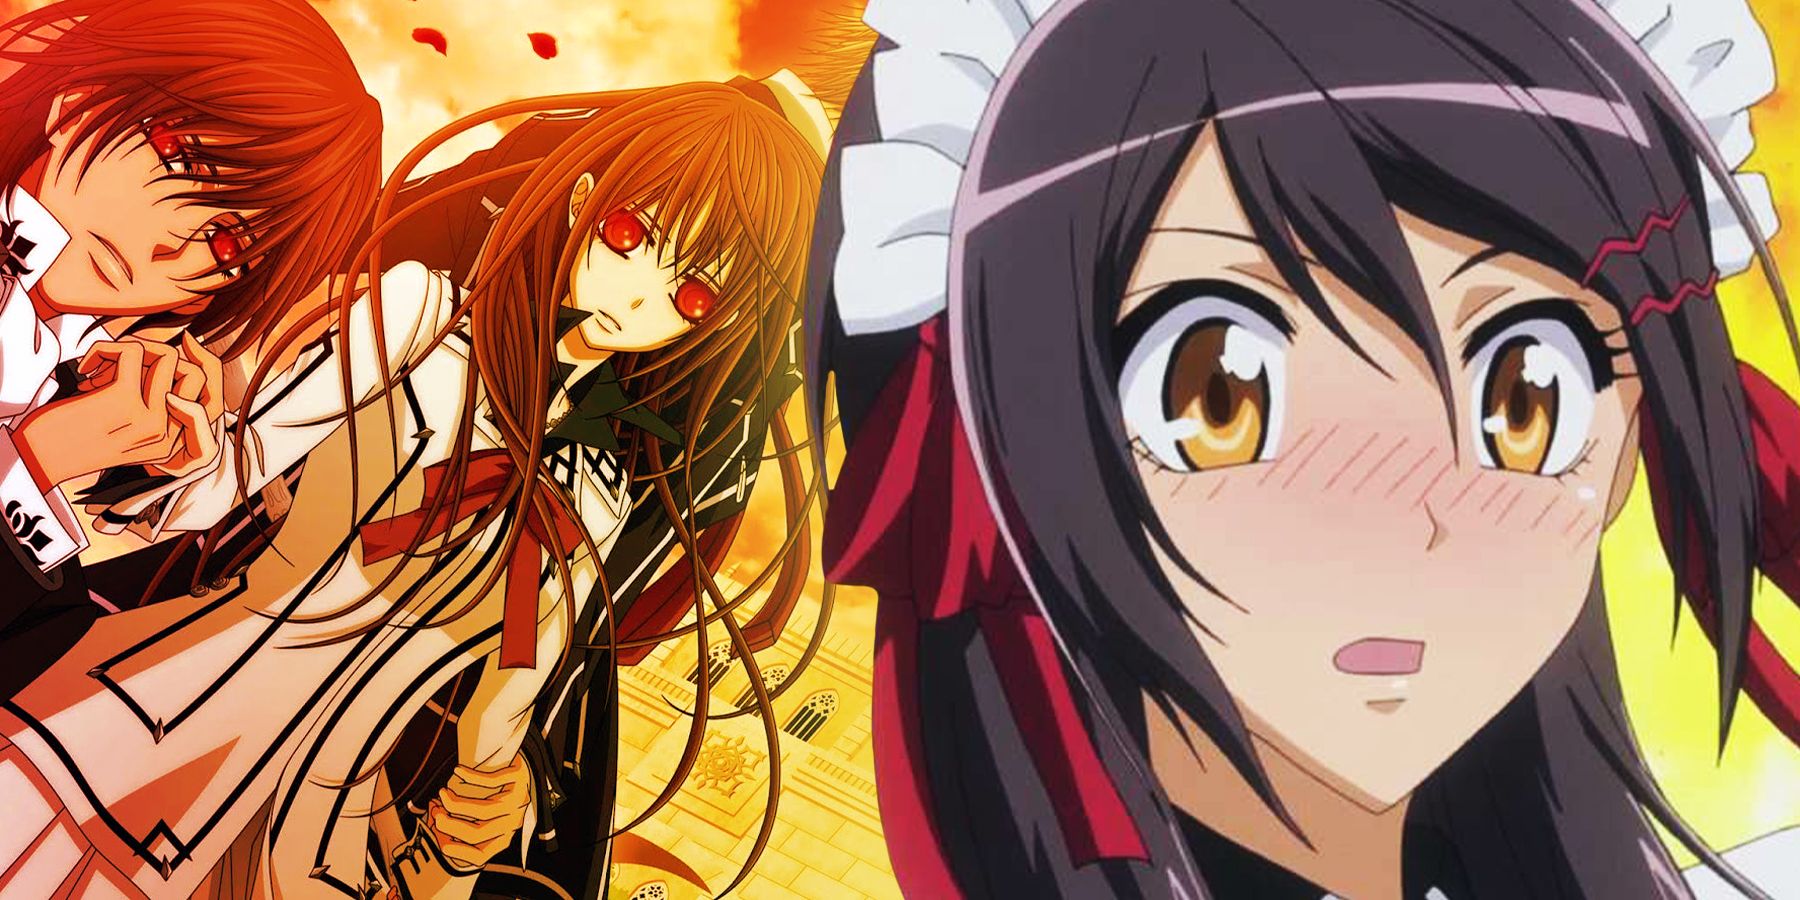 Characters from anime Vampire Knight and anime Maid Sama!